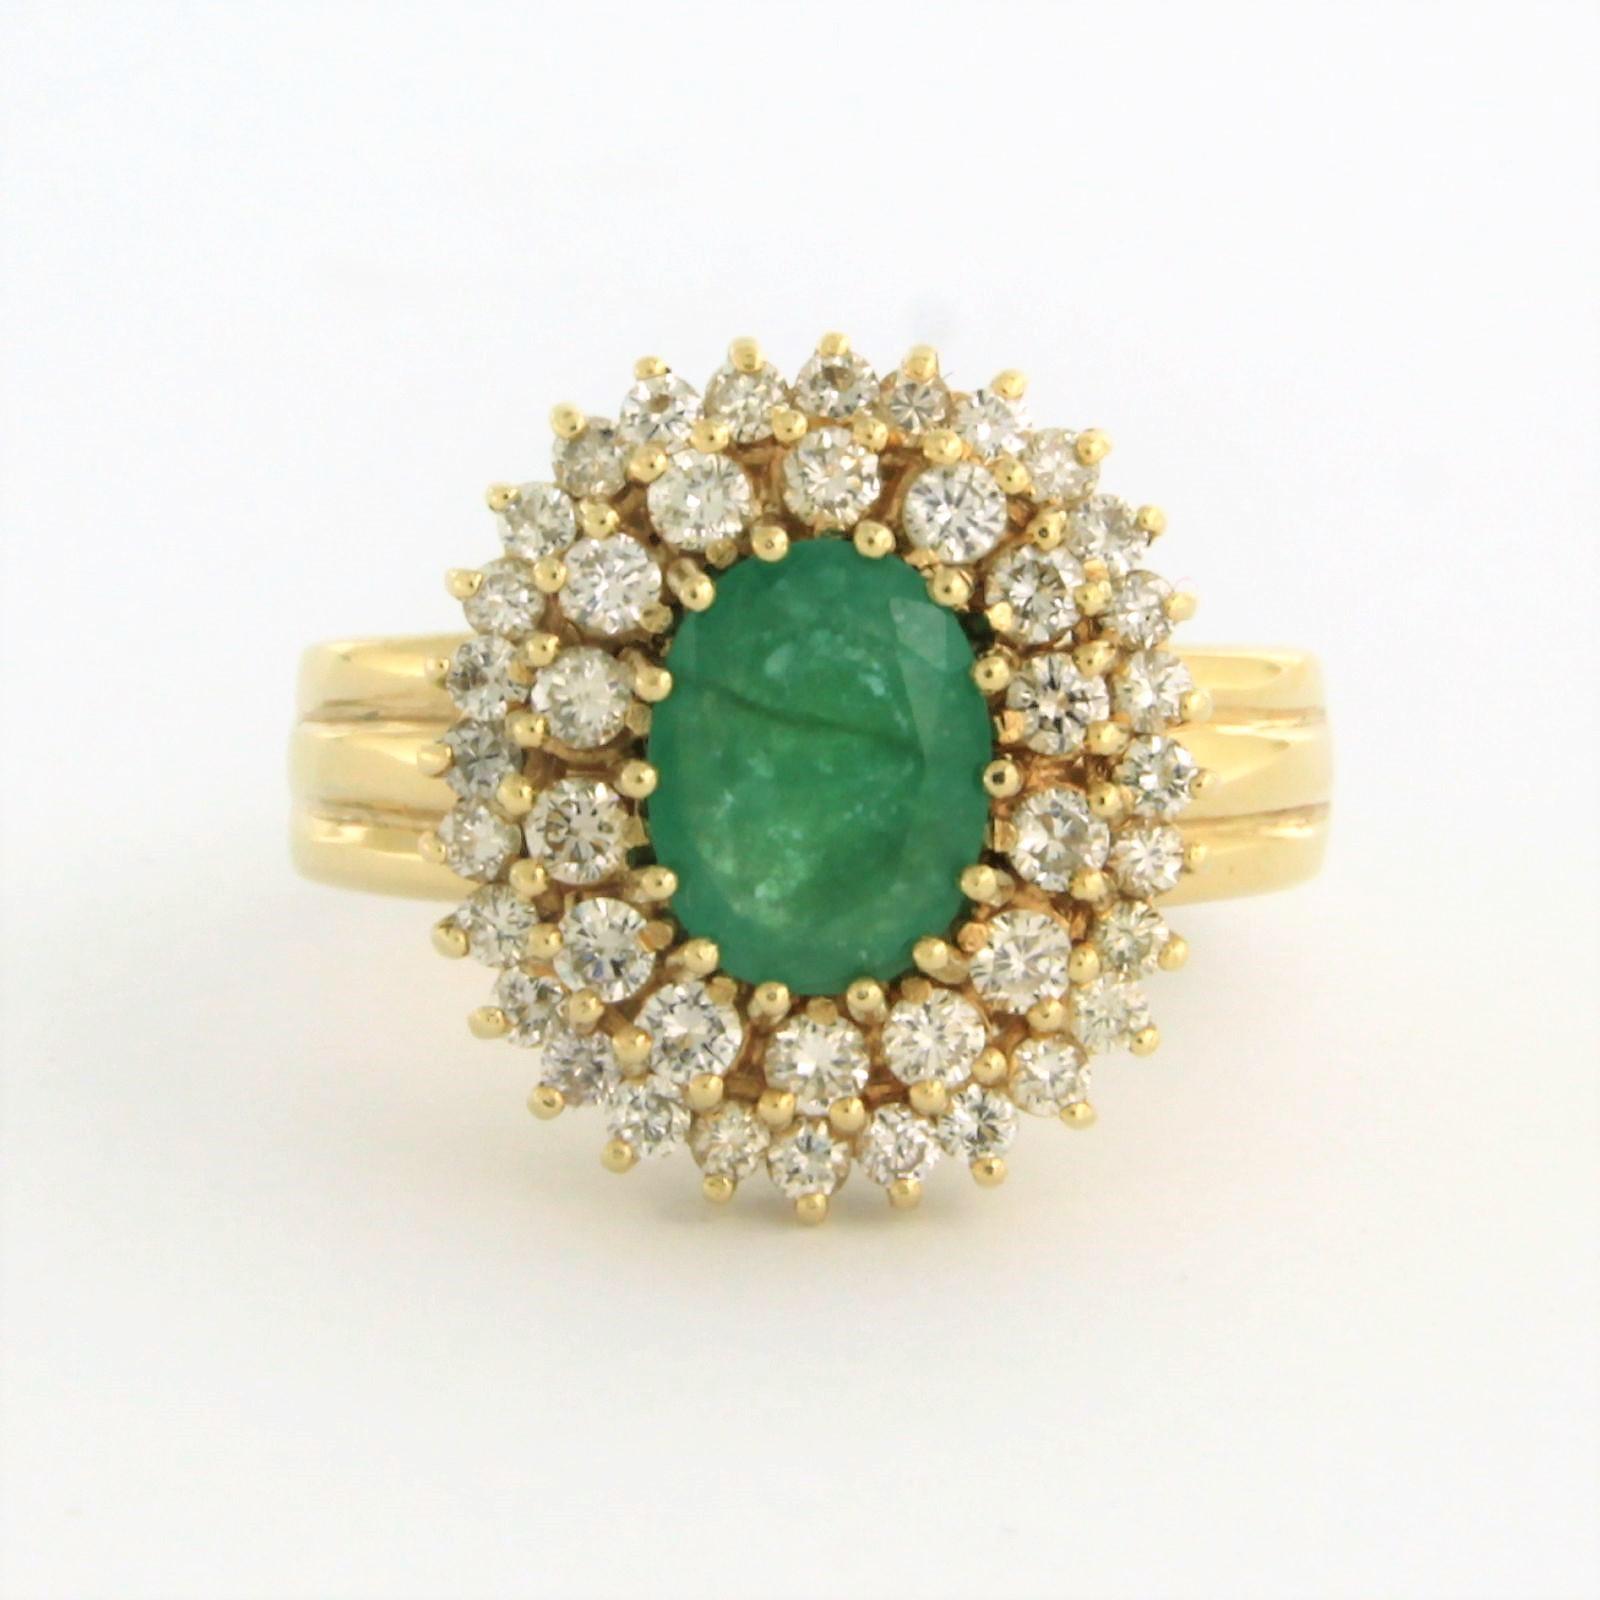 14k yellow entourage ring set with emerald. 1.10ct and an entourage of brilliant cut diamonds up to. 1.00ct – G/H – VS/SI – ring size U.S. 8.75 - EU. 18.75(59)

detailed description:

The top of the ring is in an oval shape of 1.7 cm by 1.5 cm wide